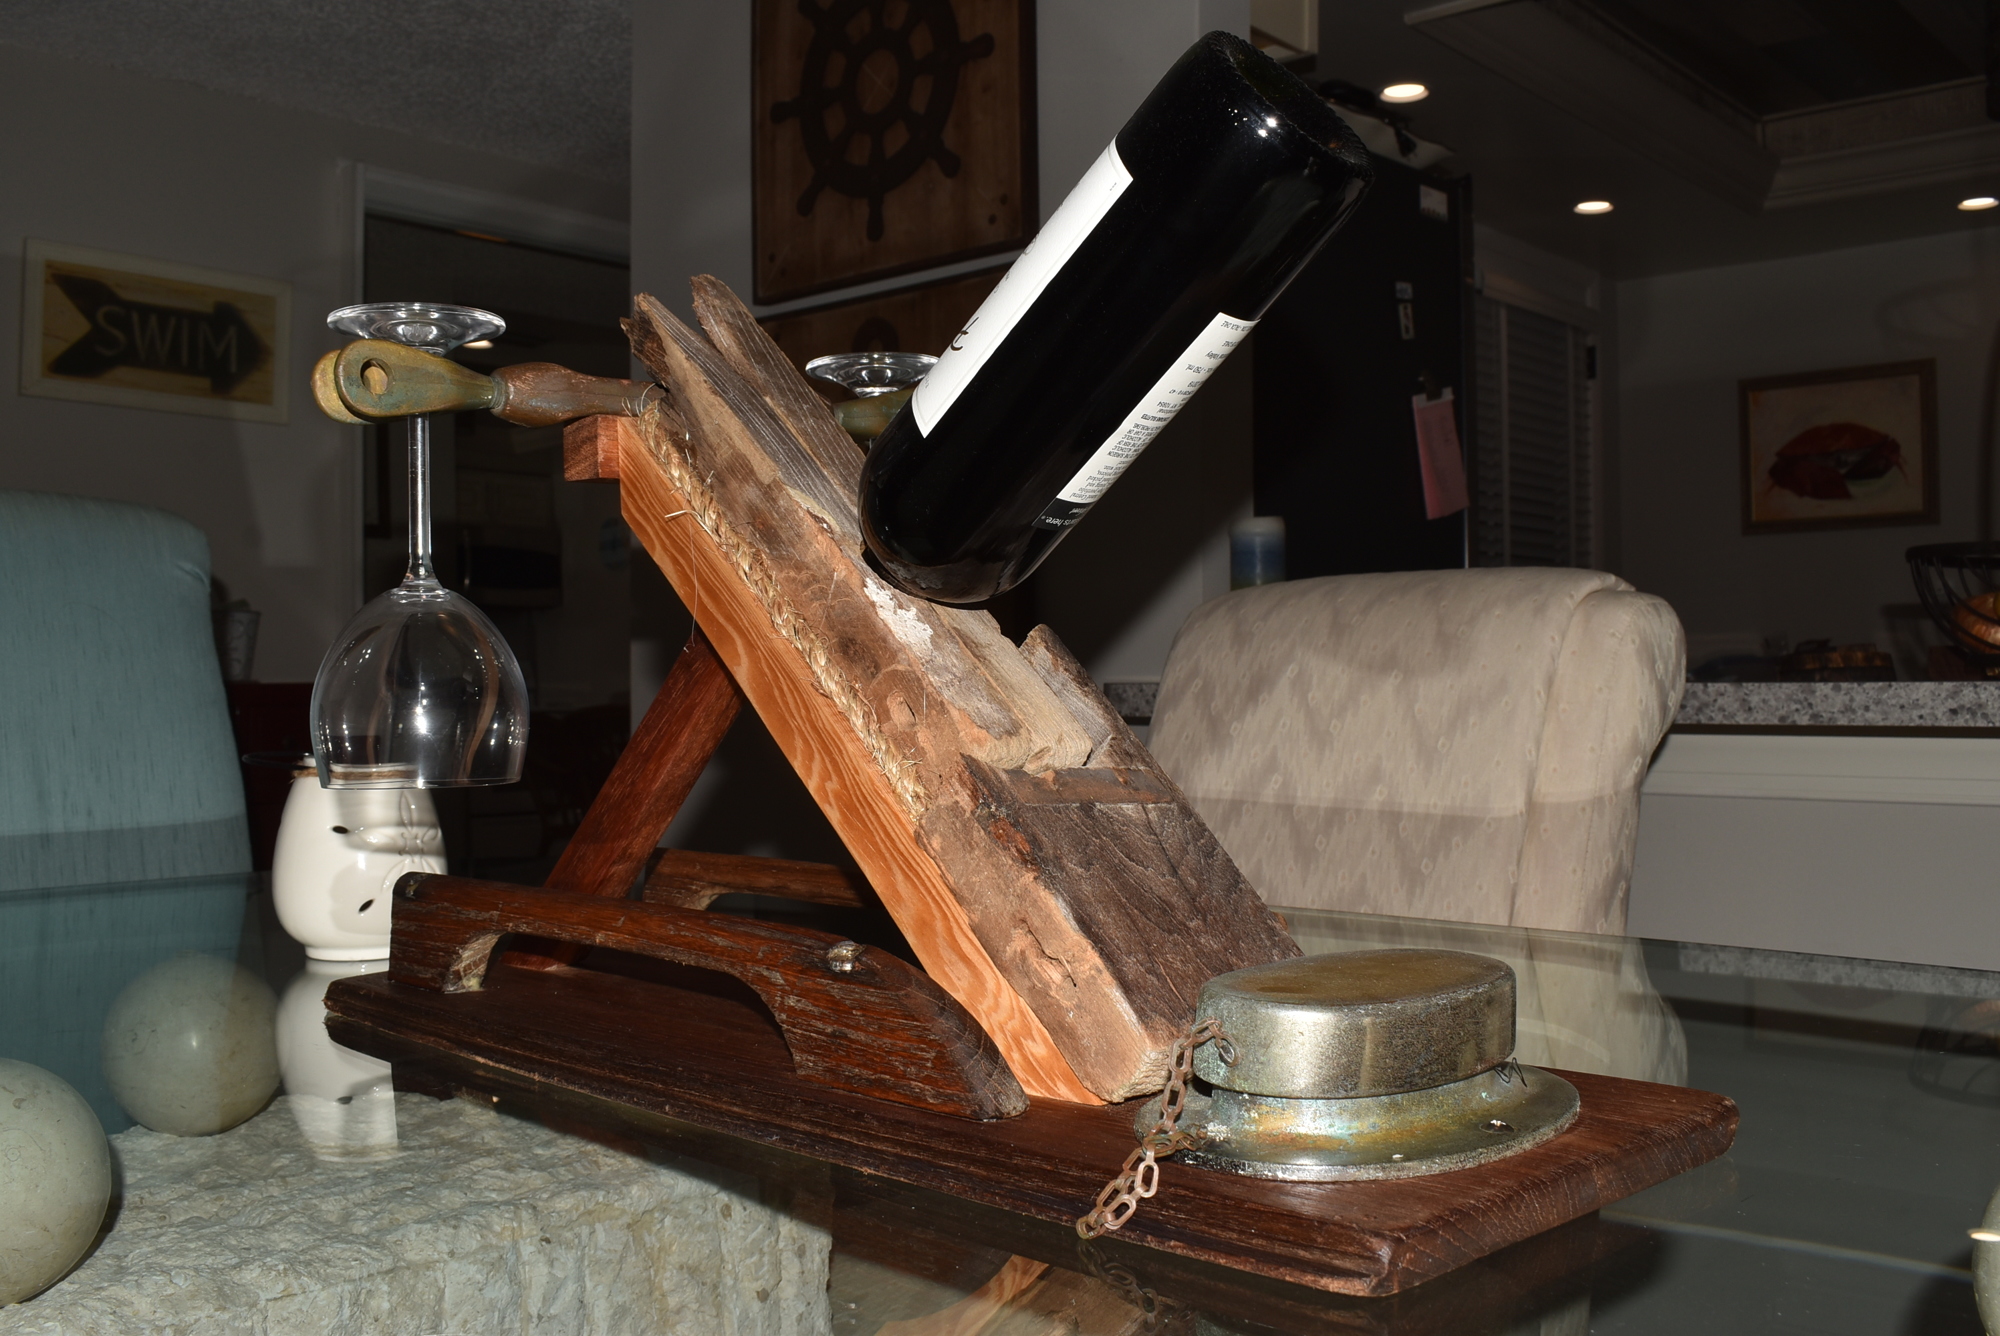 Mike Ciccone built a wine bottle holder from the remains of the sailboat.